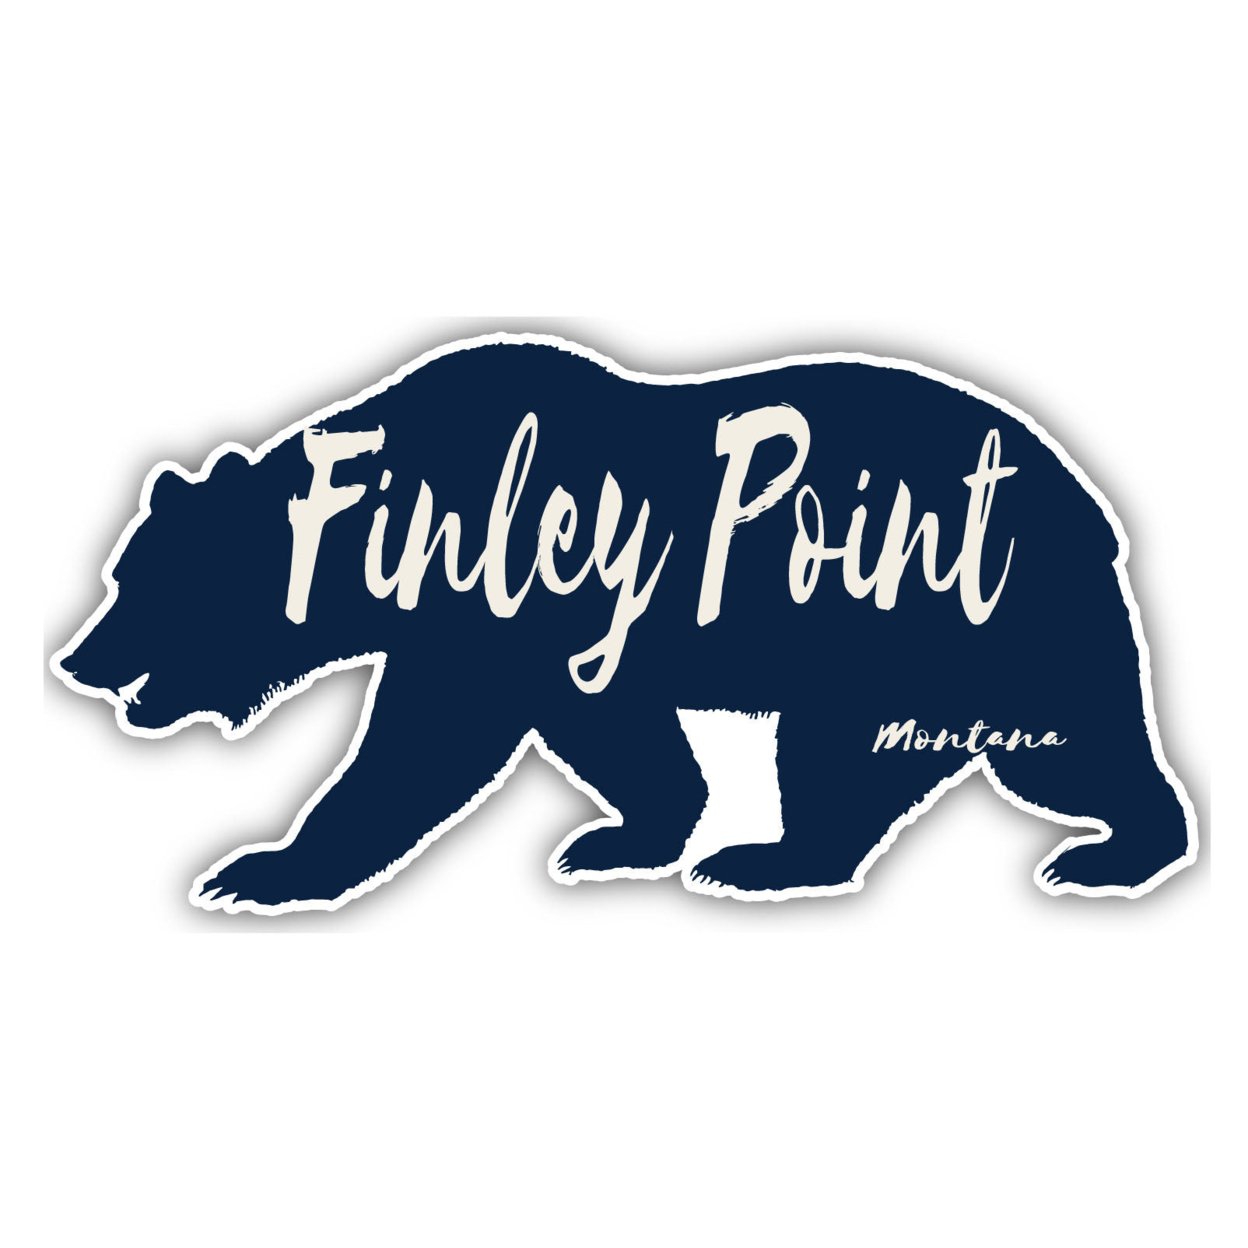 Finley Point Montana Souvenir Decorative Stickers (Choose Theme And Size) - 4-Pack, 12-Inch, Bear